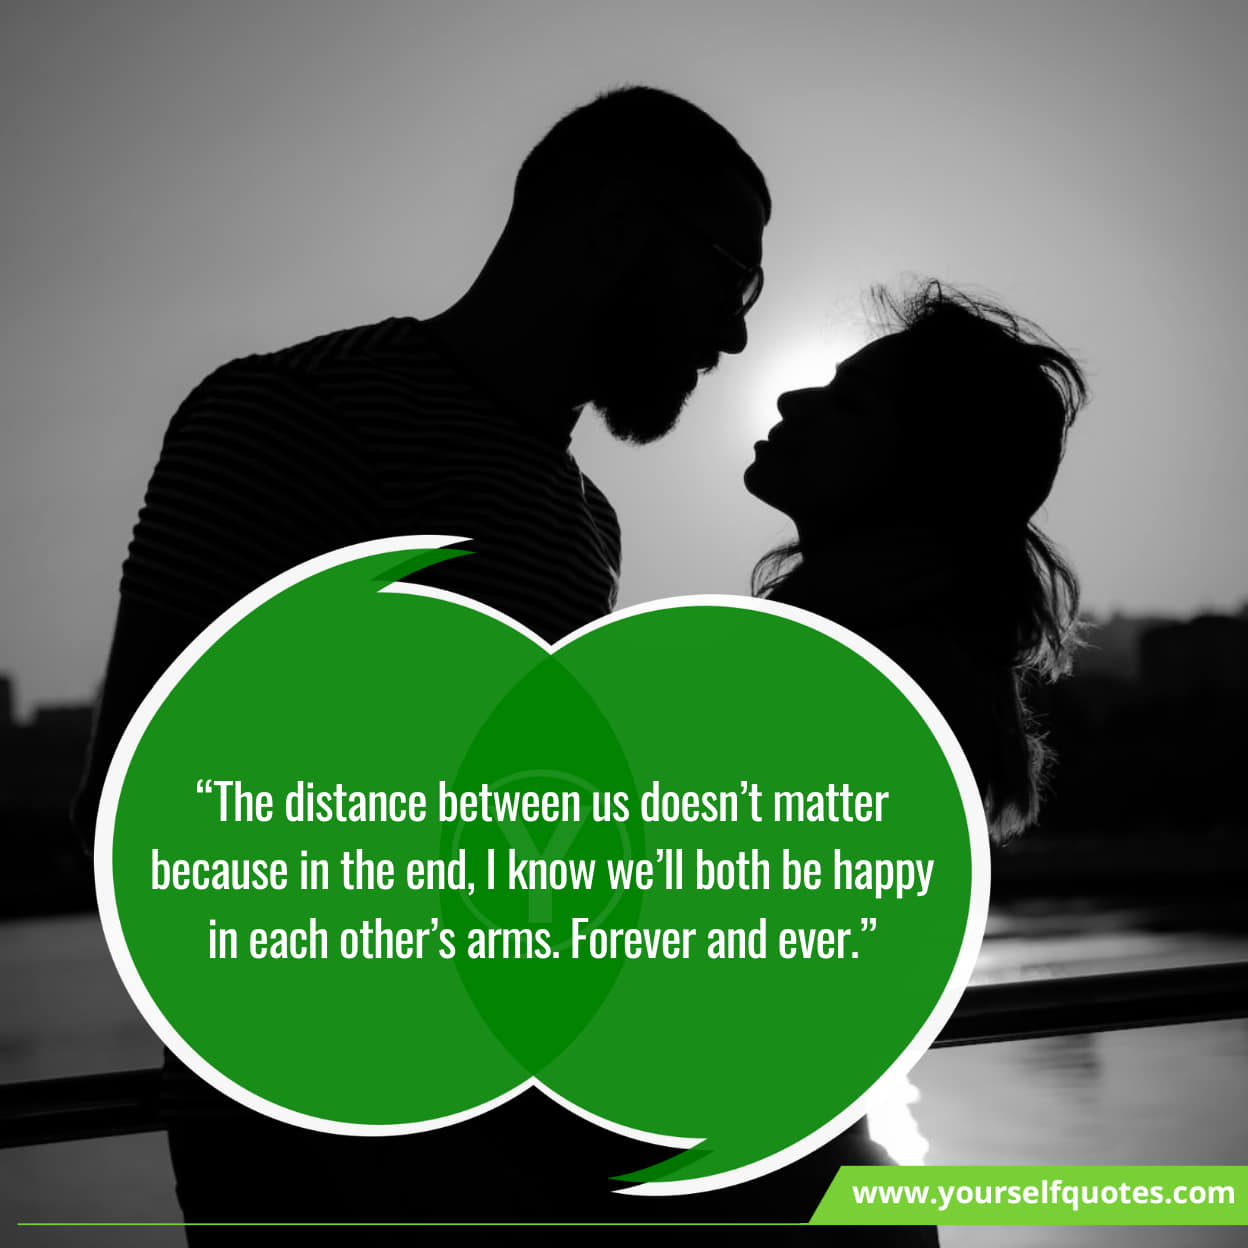 Long-Distance Relationship Quotes On Him